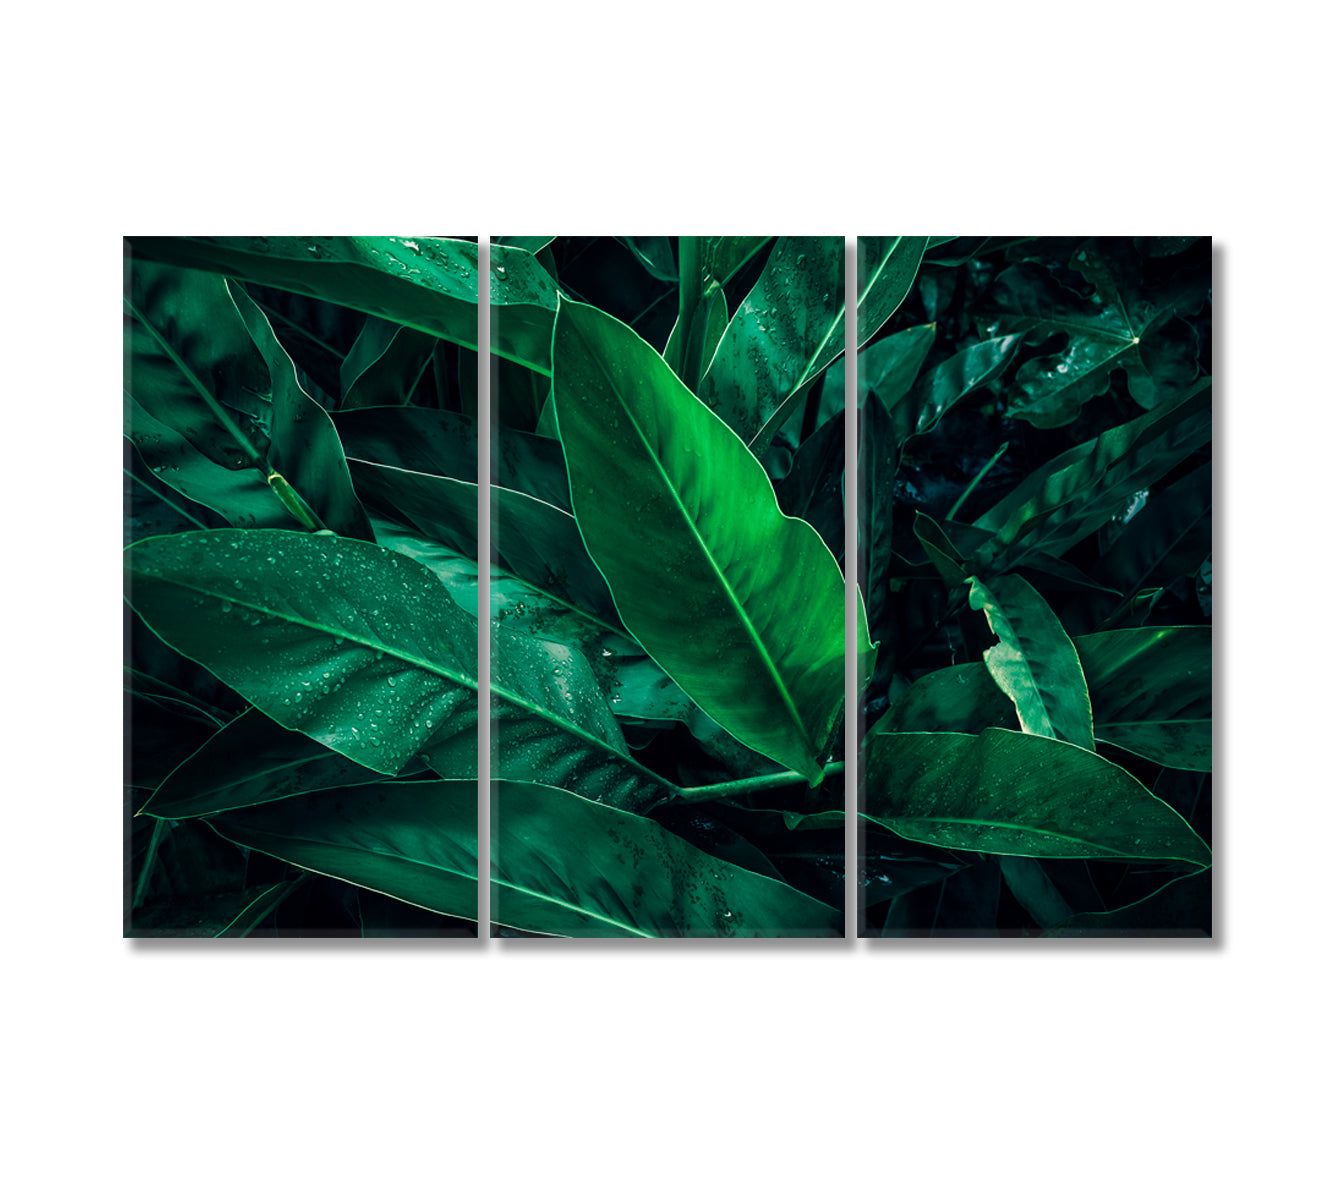 Large Tropical Leaf with Water Drops Canvas Print-Canvas Print-CetArt-3 Panels-36x24 inches-CetArt